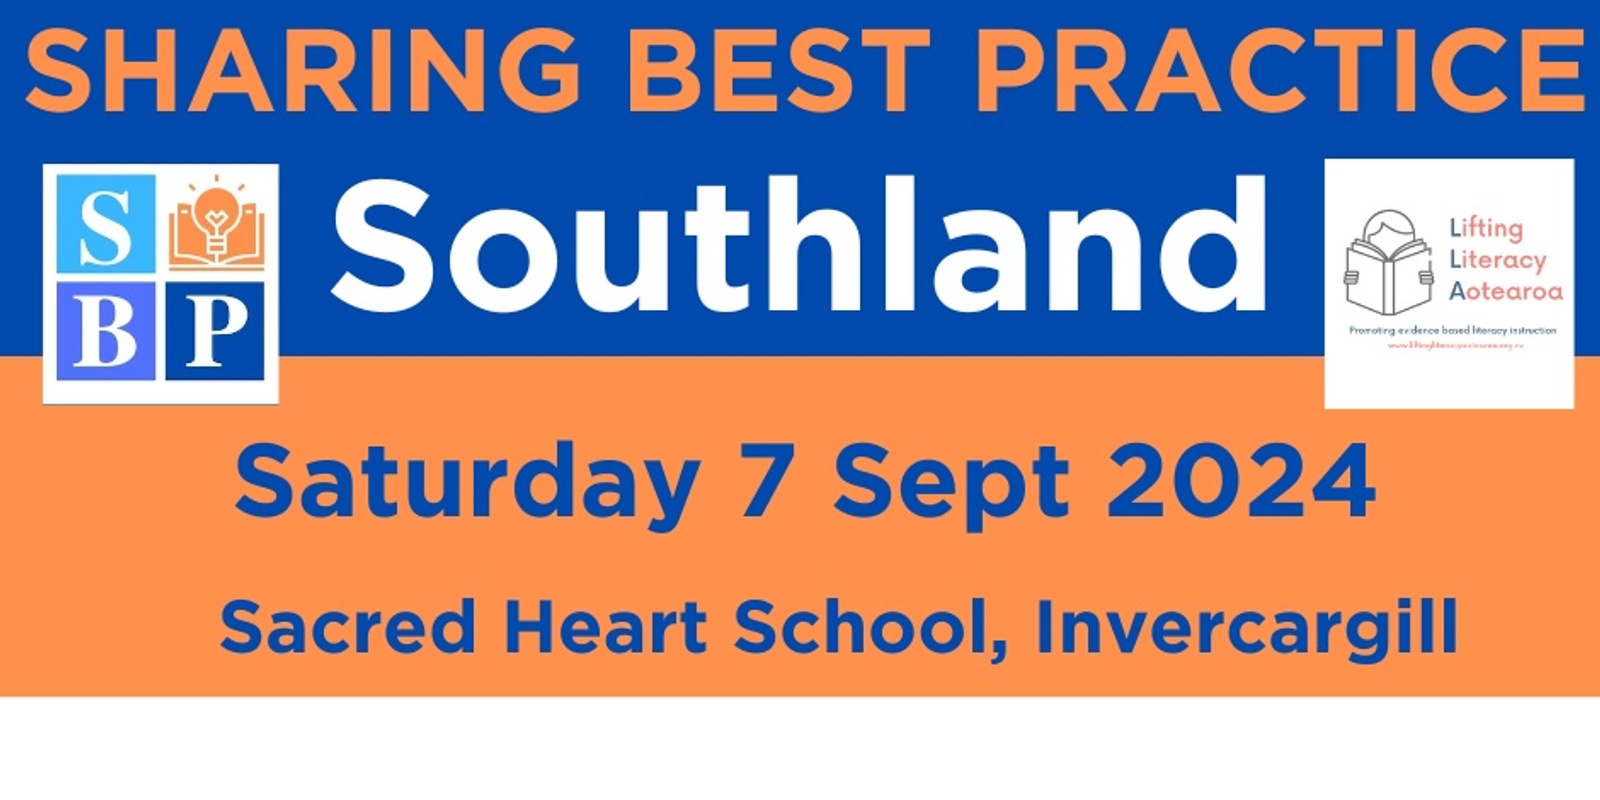 Banner image for Sharing Best Practice Southland 2024